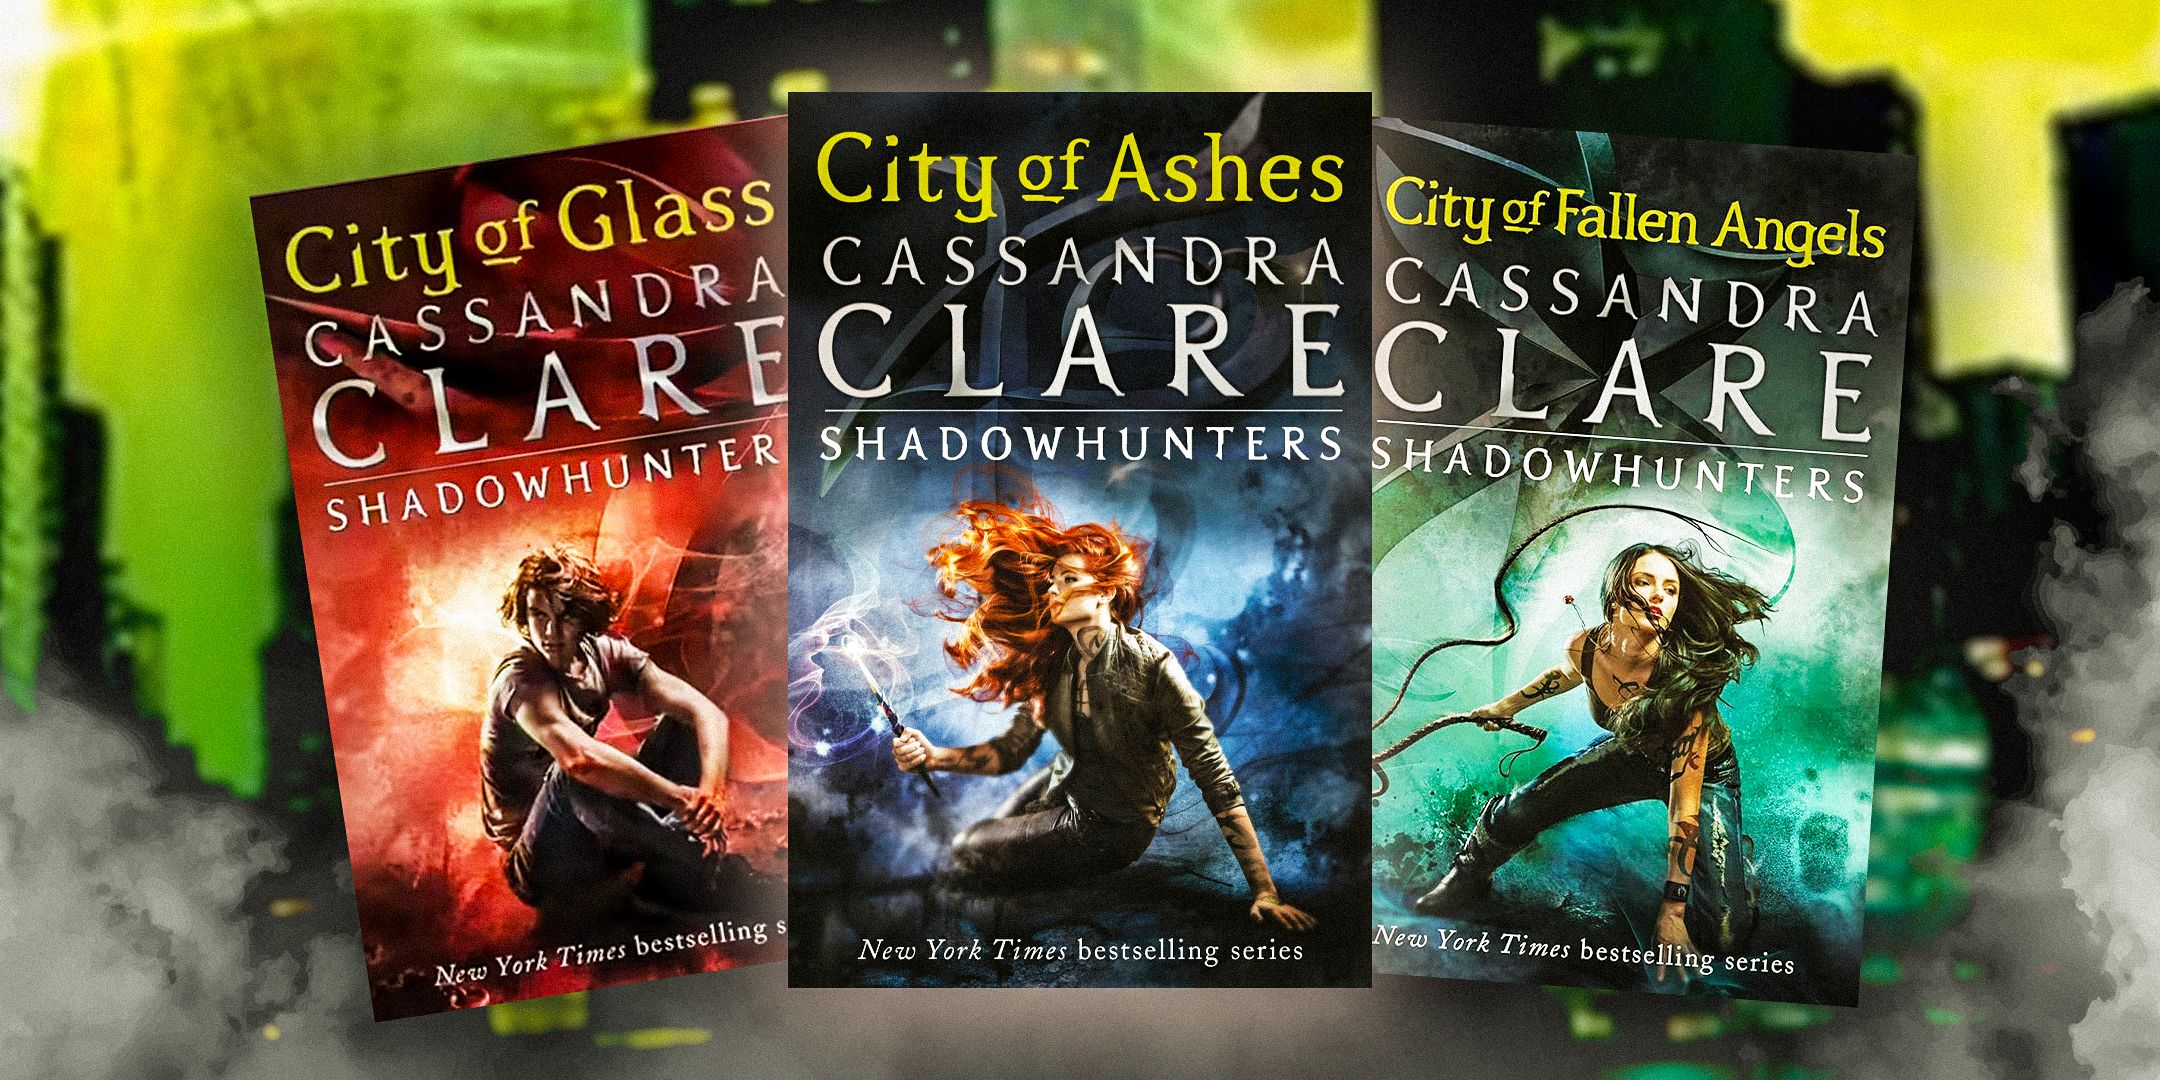 The covers of City of Glass, City of Ashes, and City of Fallen Angels from The Mortal Instruments book series